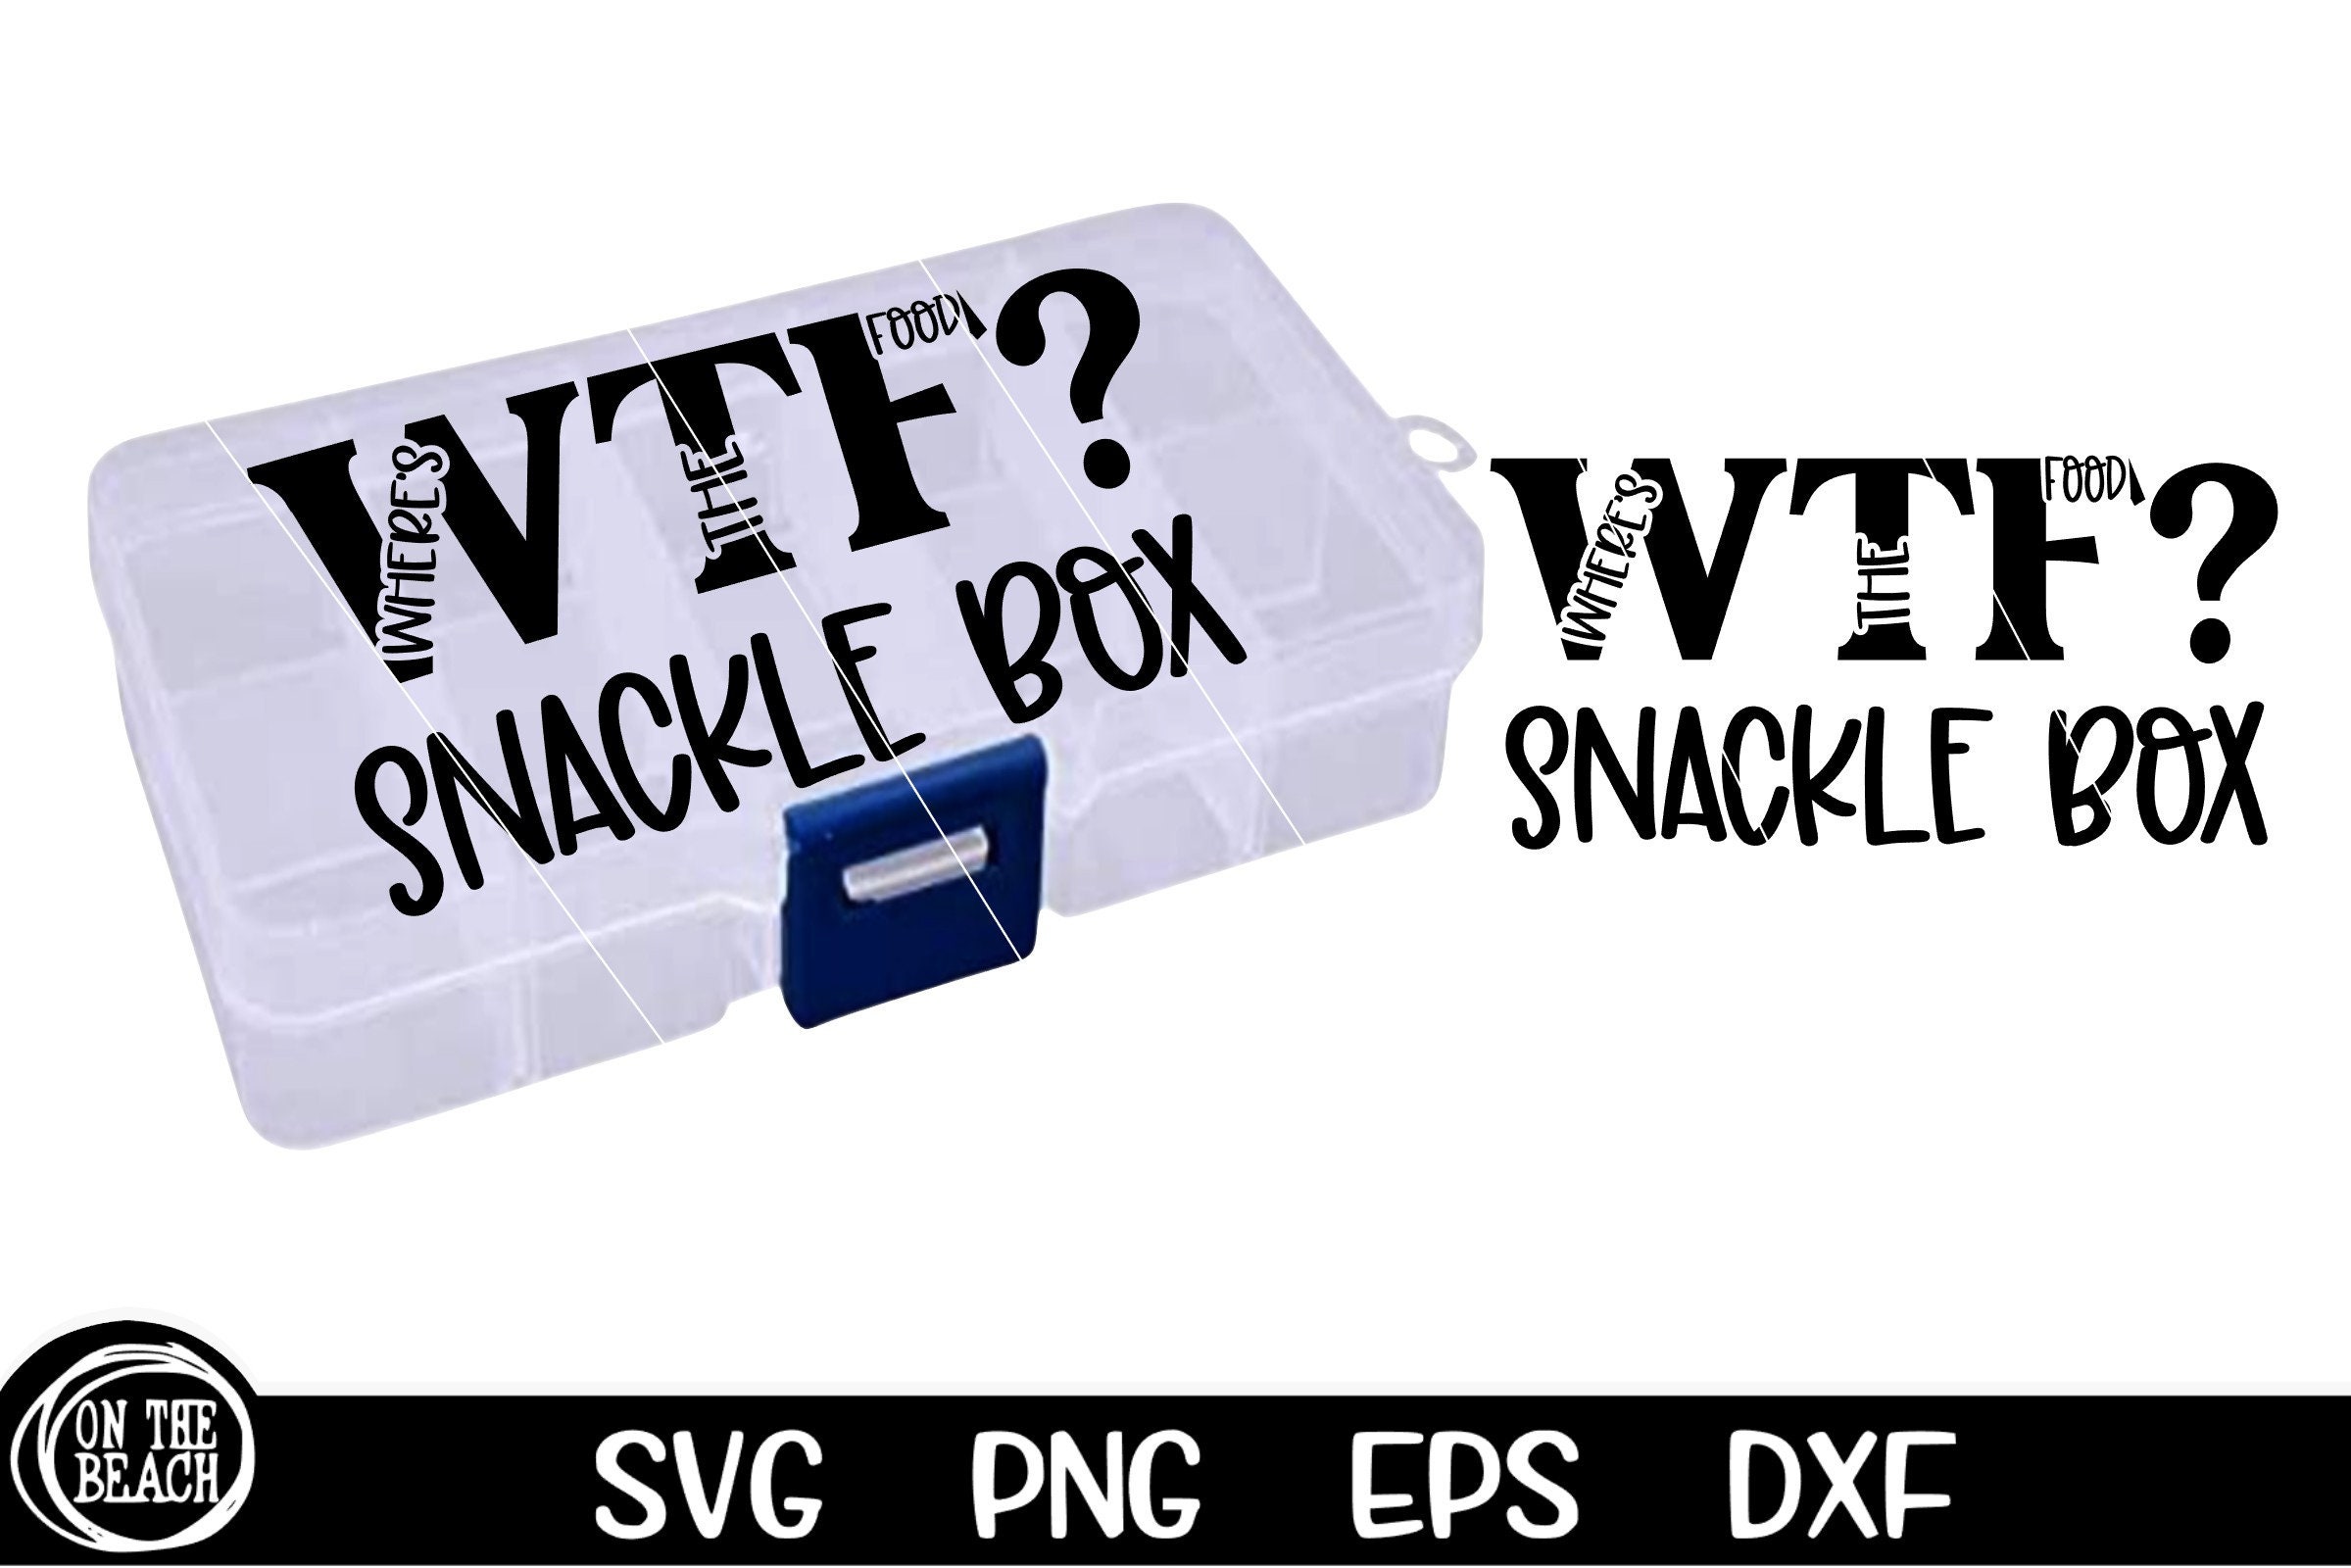 Snackle Box Svg Snack Box Svg Where's the Food Tackle Box Svg